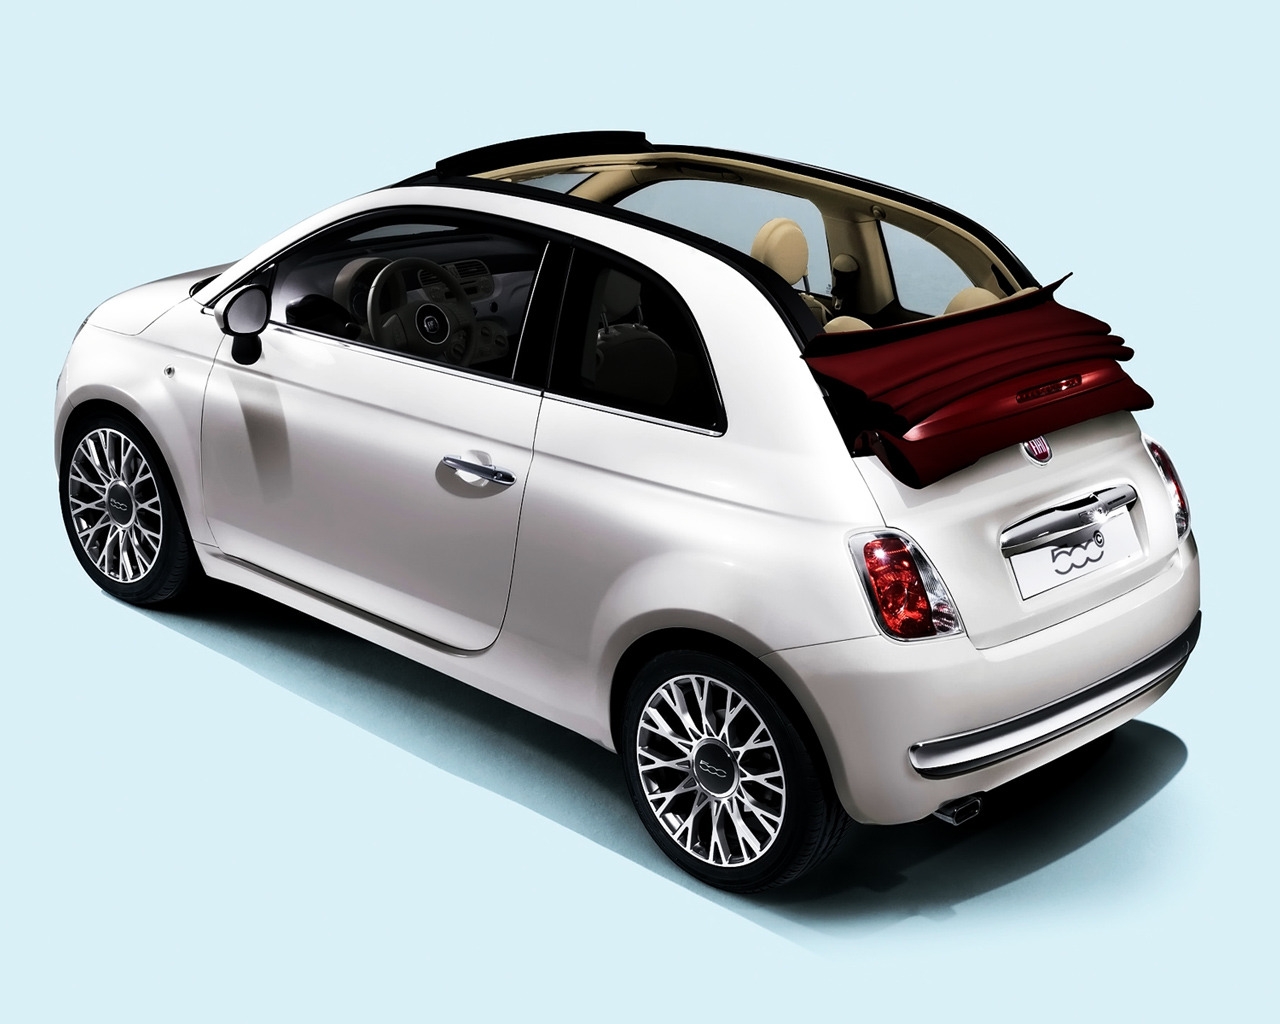 2009 Fiat 500C for 1280 x 1024 resolution